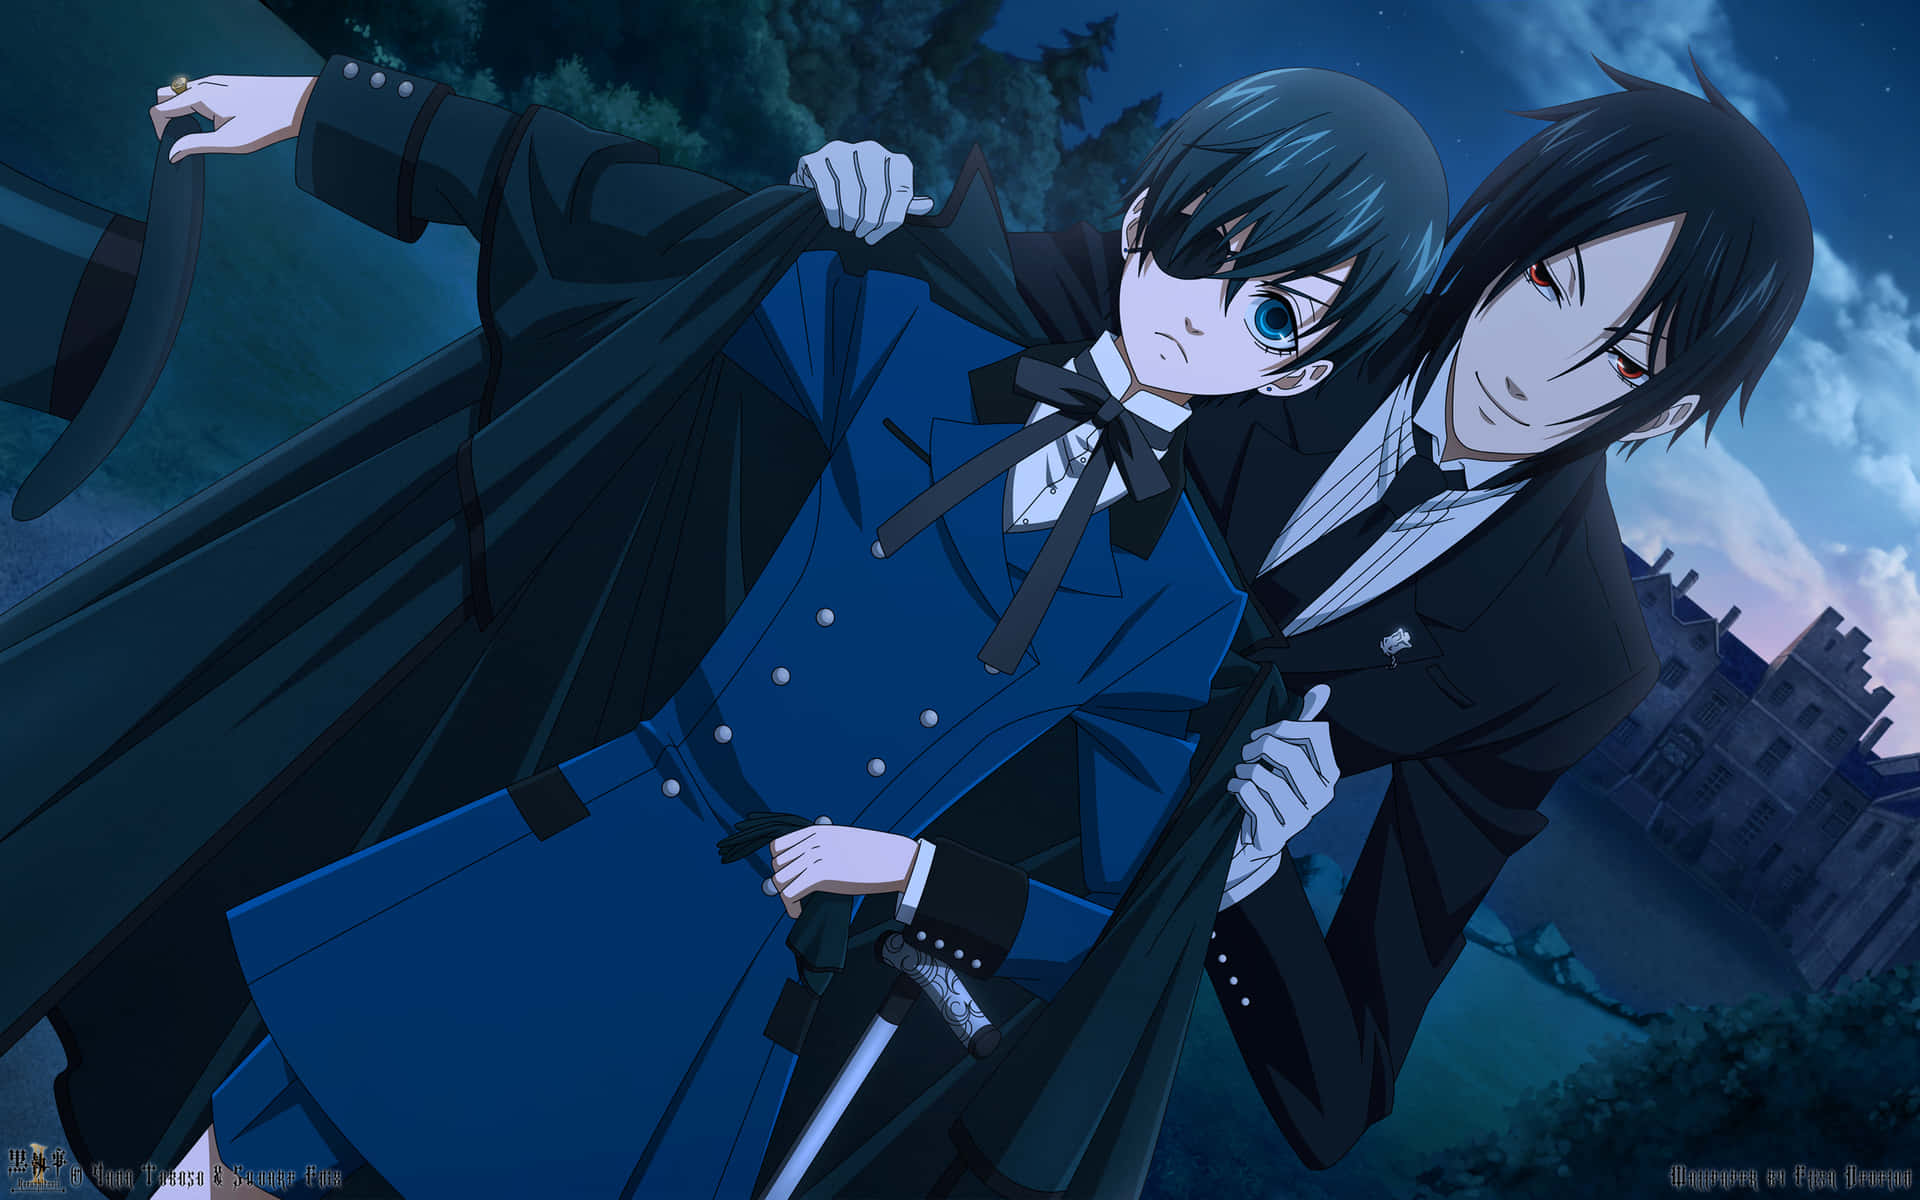 A thrilling adventure begins for Ciel, the young Earl and his mysterious Butler, Sebastian.